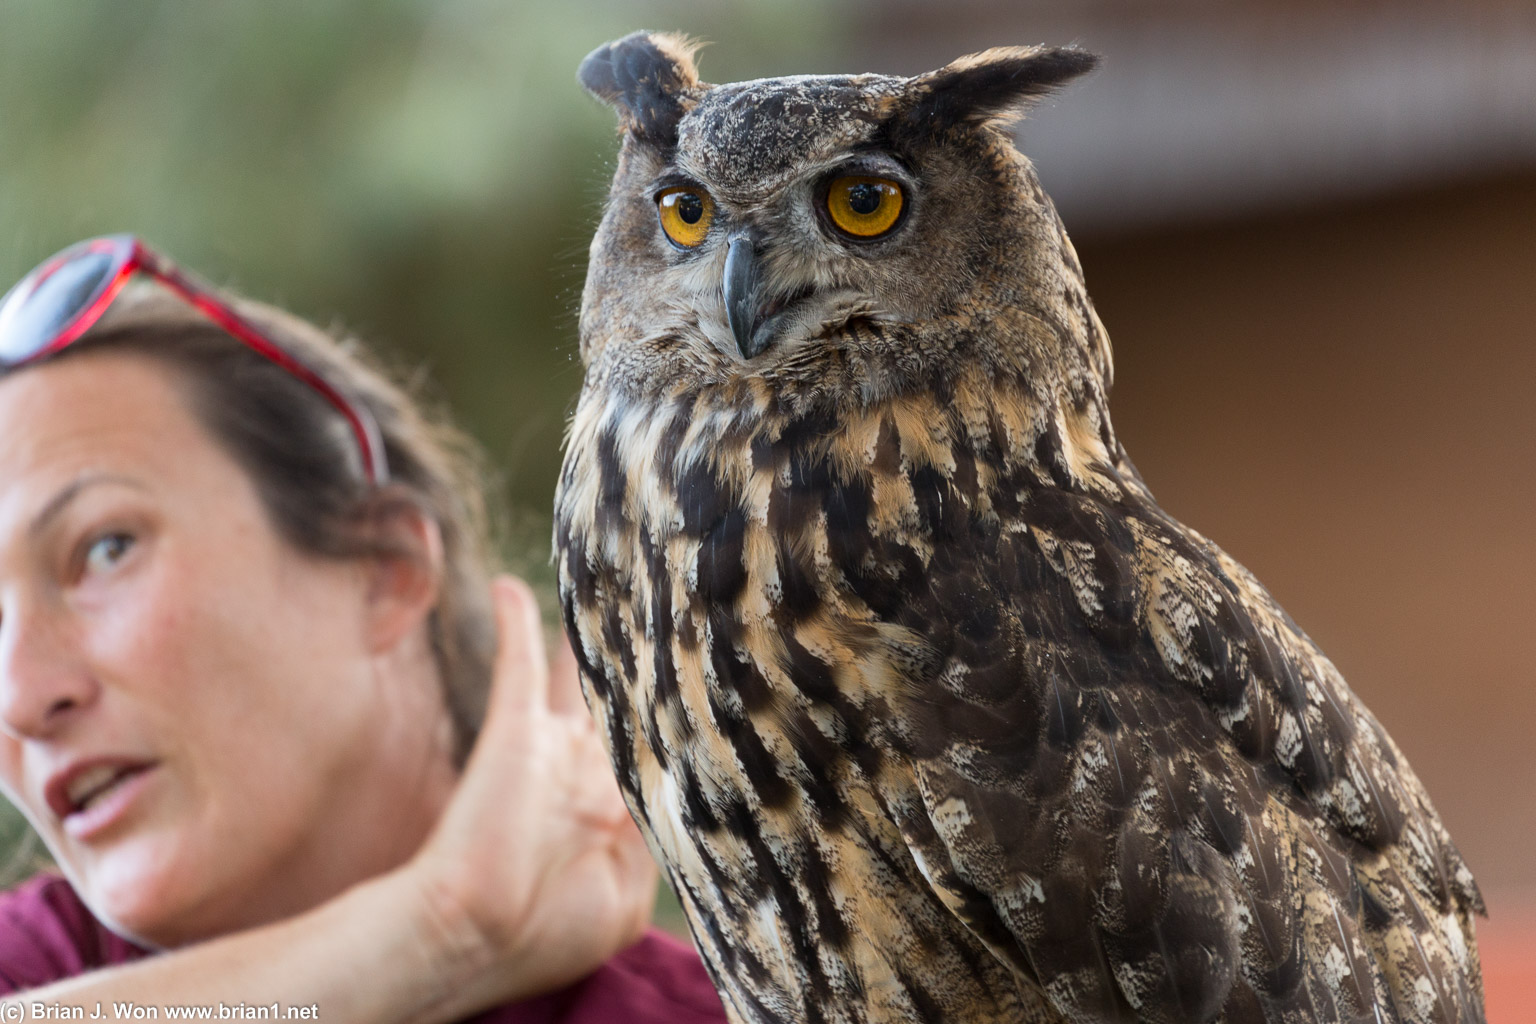 Great horned owl. Such majestic birds.